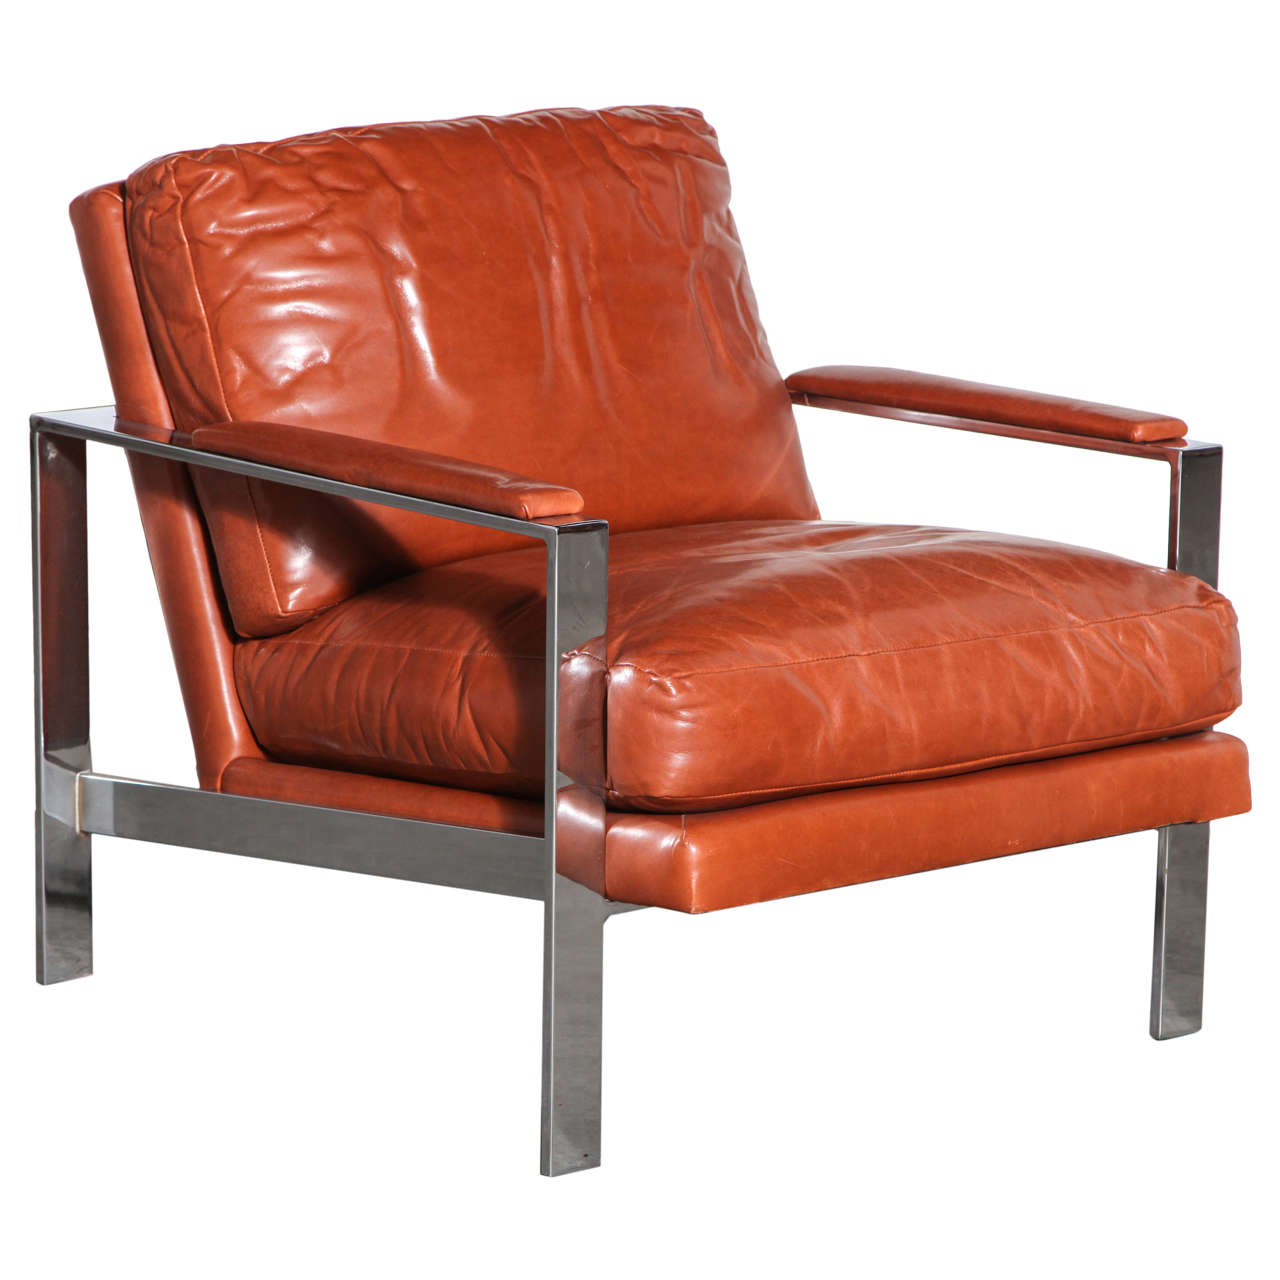 Milo Baughman Leather And Chrome Chair, Chrome And Leather Chairs